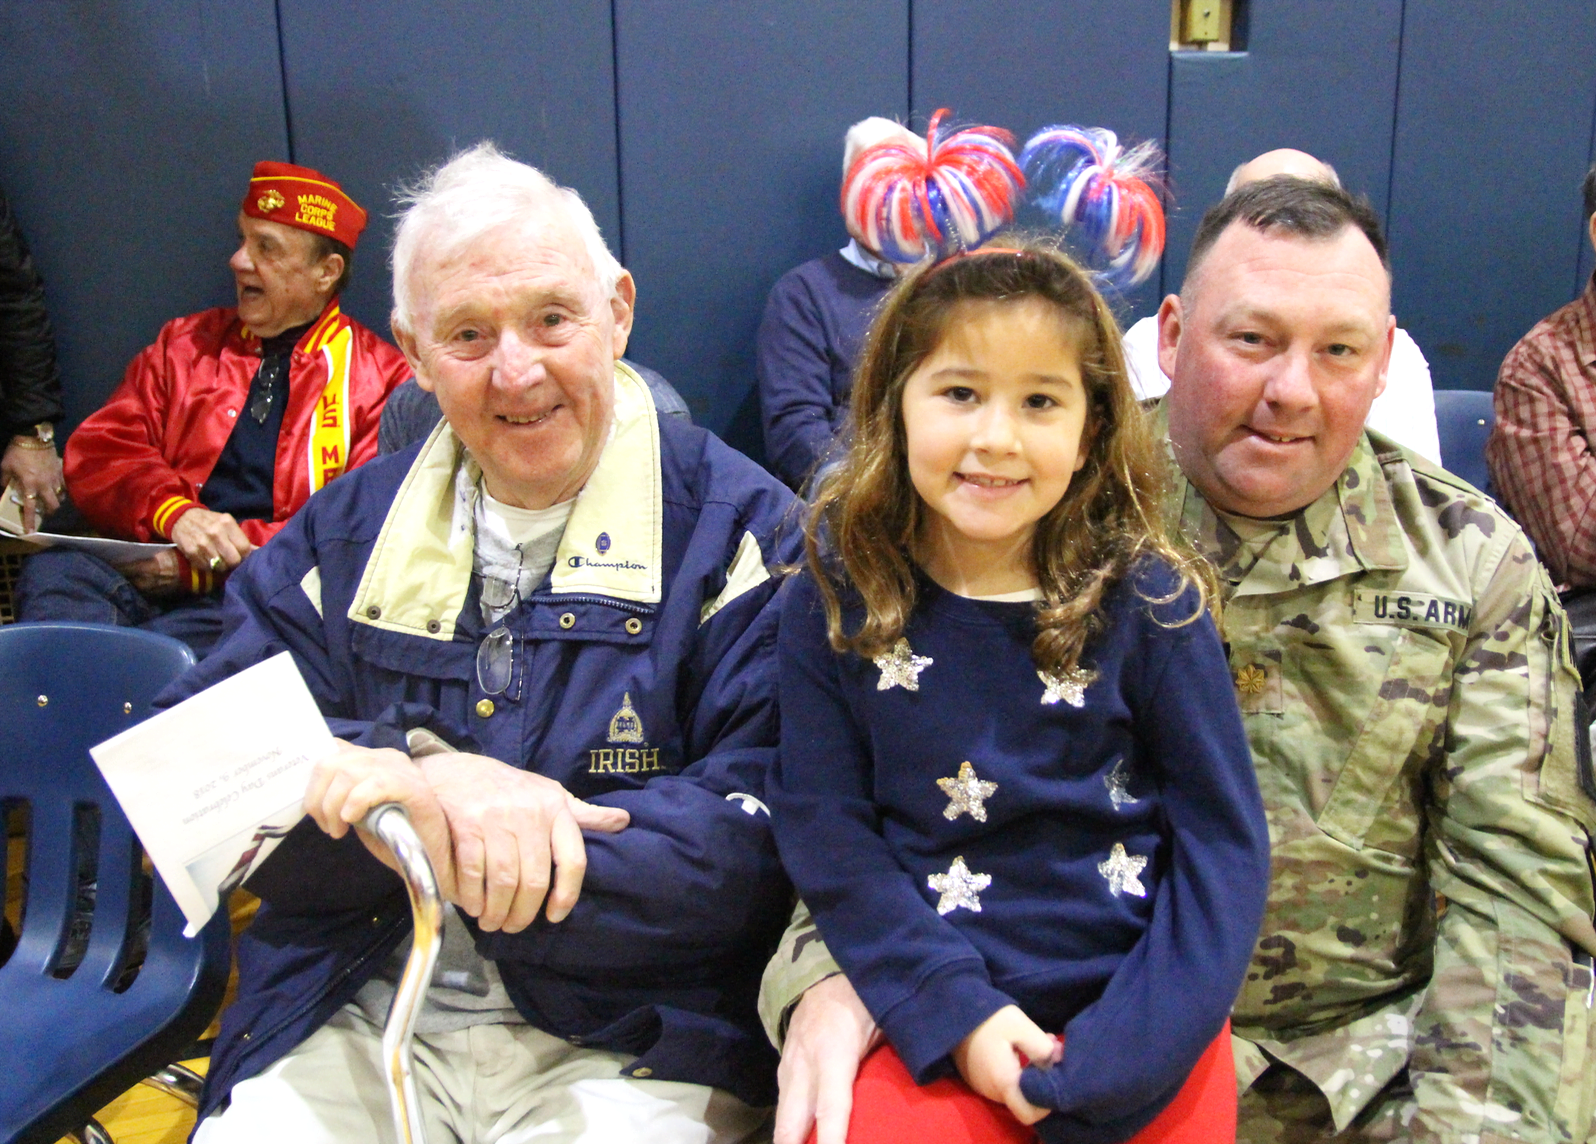 At North Mianus School Veterans Day ceremony are Greenwich Police Sgt. Sean O’Donnell, who served in the US Army, with daughter Keira and his father Denis who served from 1957-60 in the US Army in Germany. Nov 9, 2018 Photo: Leslie Yager